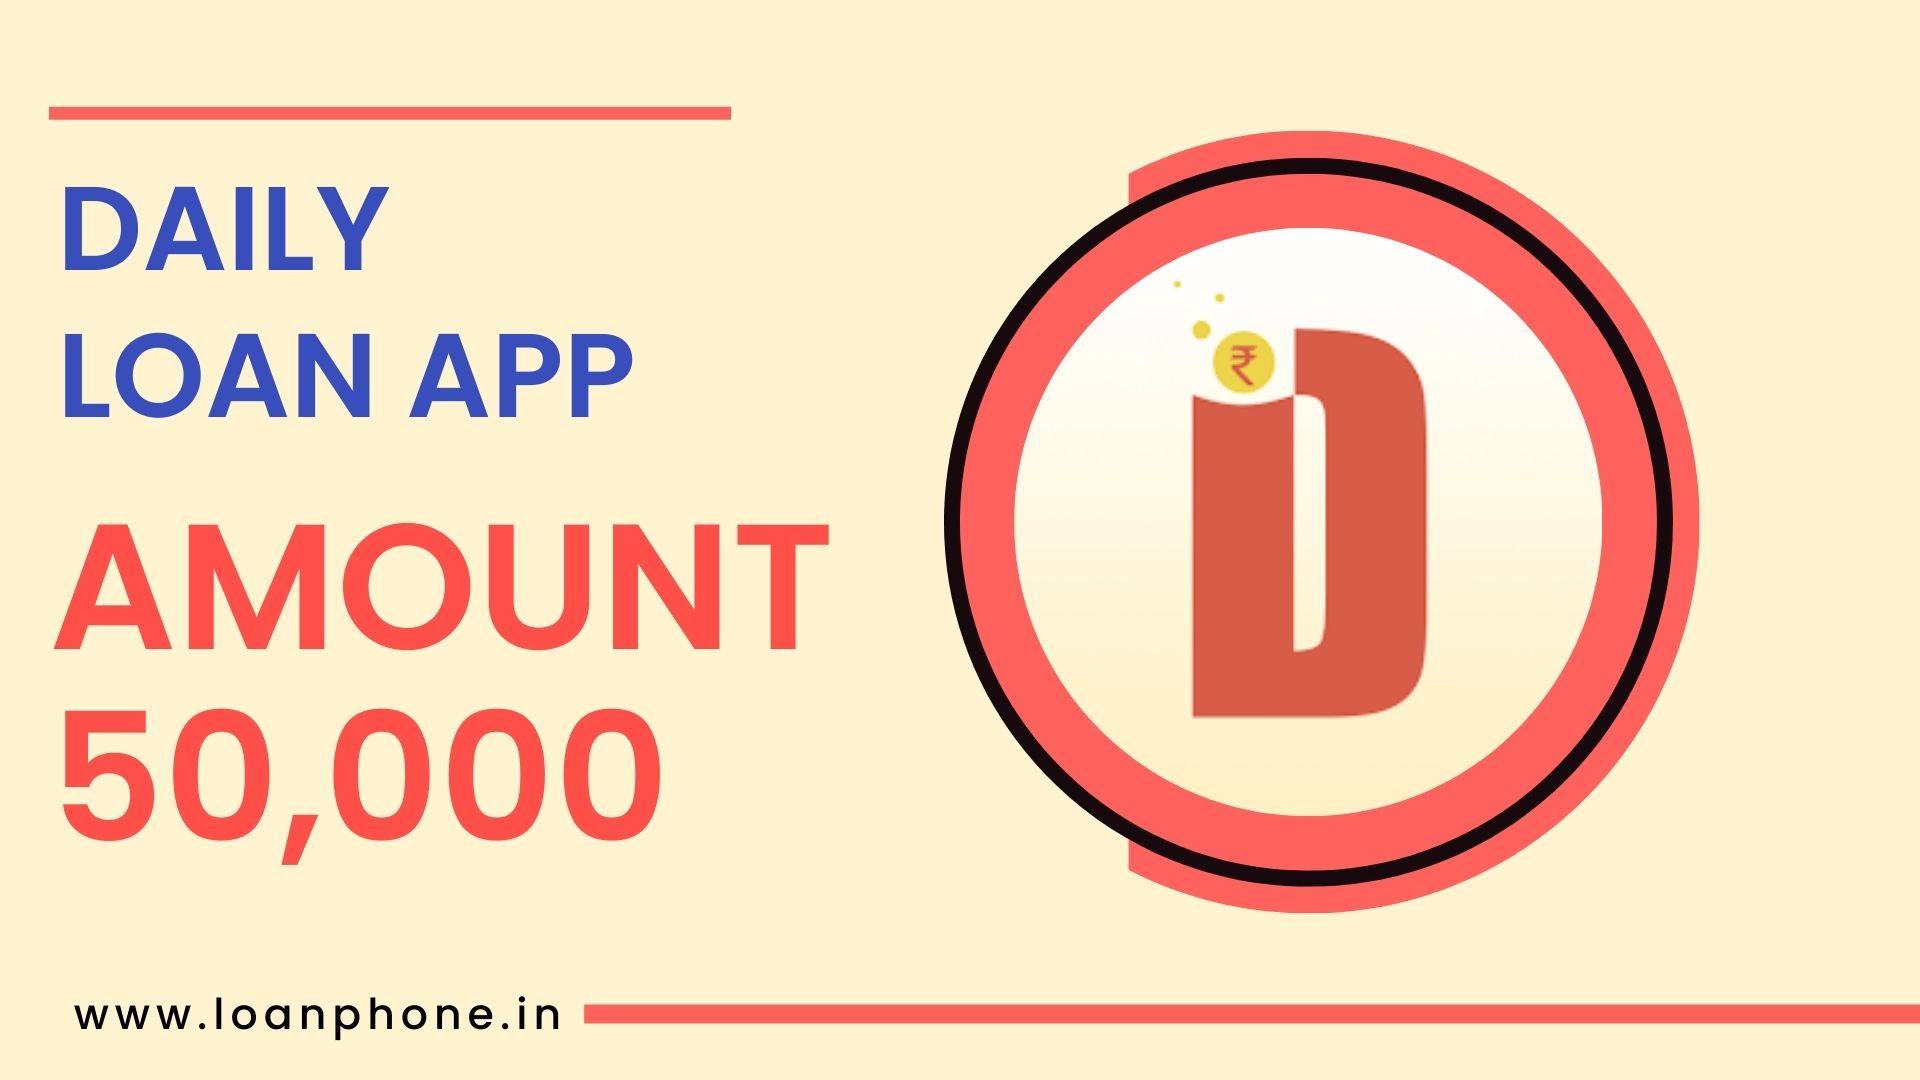 Daily Loan App Apply Online | Daily Loan Interest Rate | Review